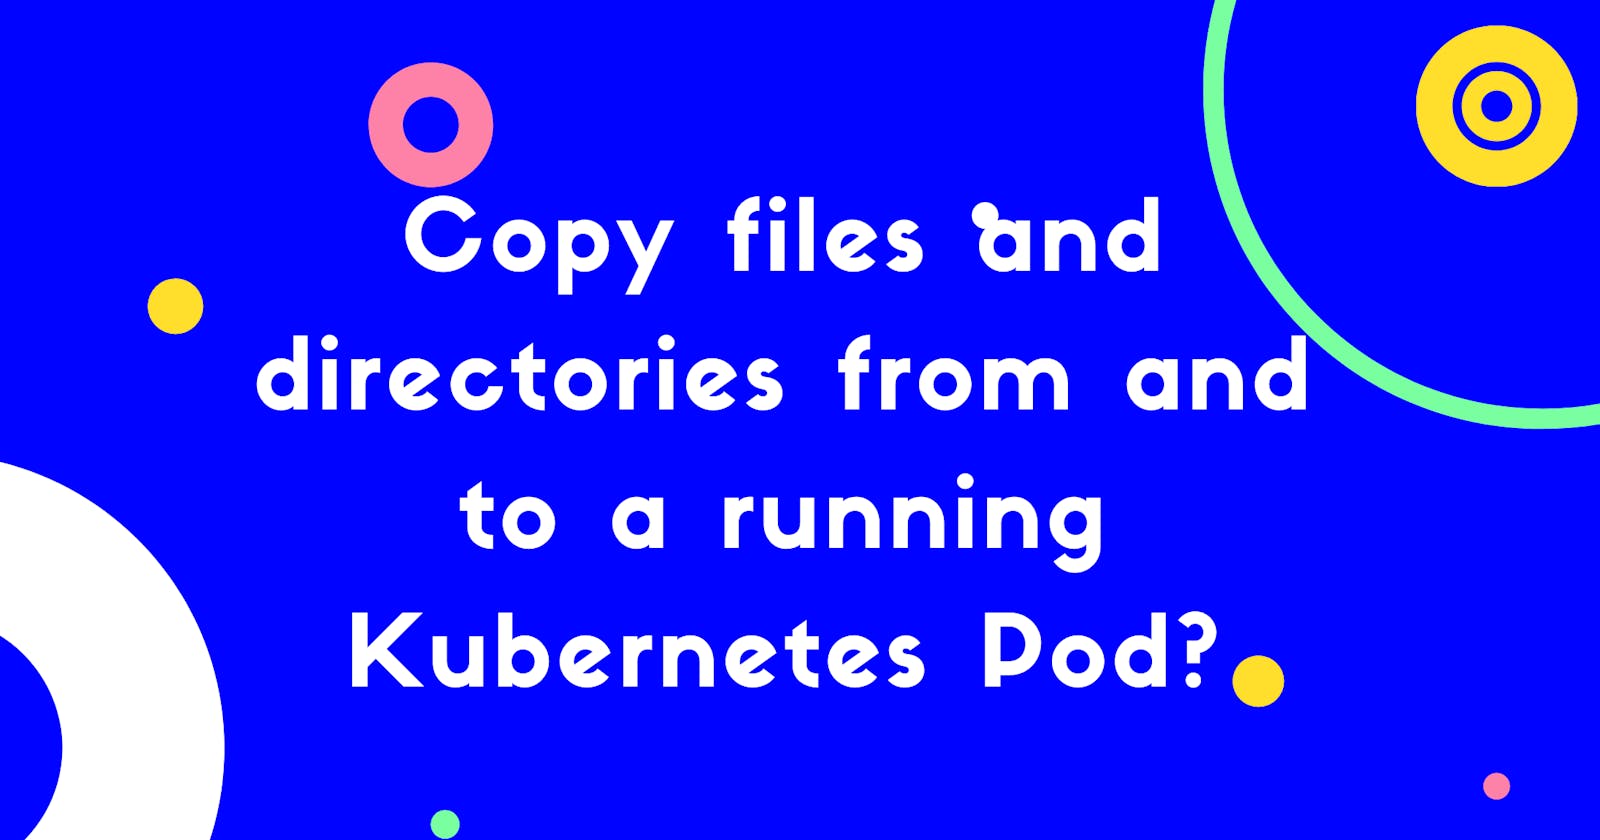 How to copy files and directories from and to a running Kubernetes Pod?